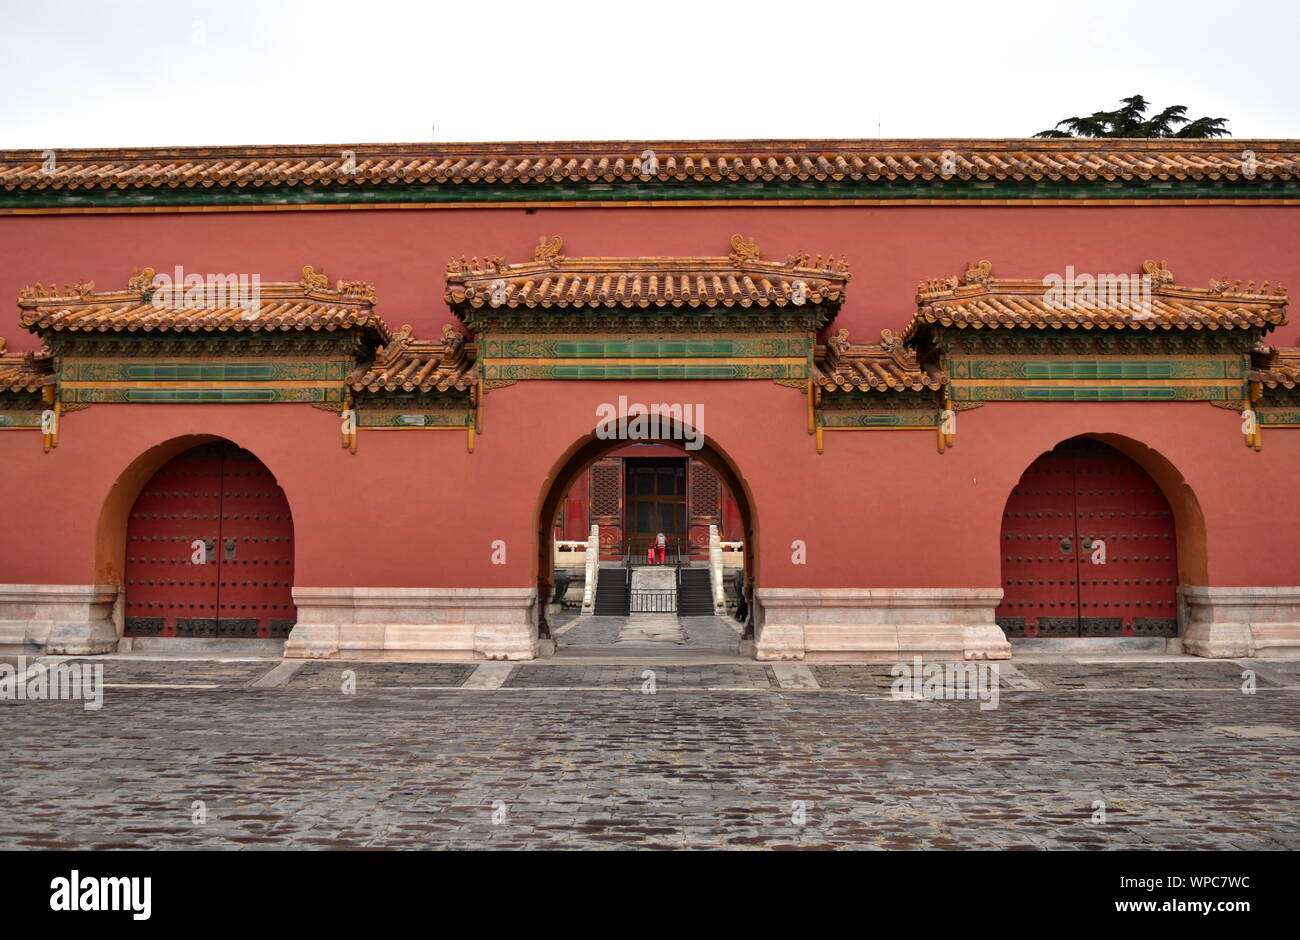 Three gates of Forbidden City palace in classic Chinese architectural style, Beijing, China Stock Photo